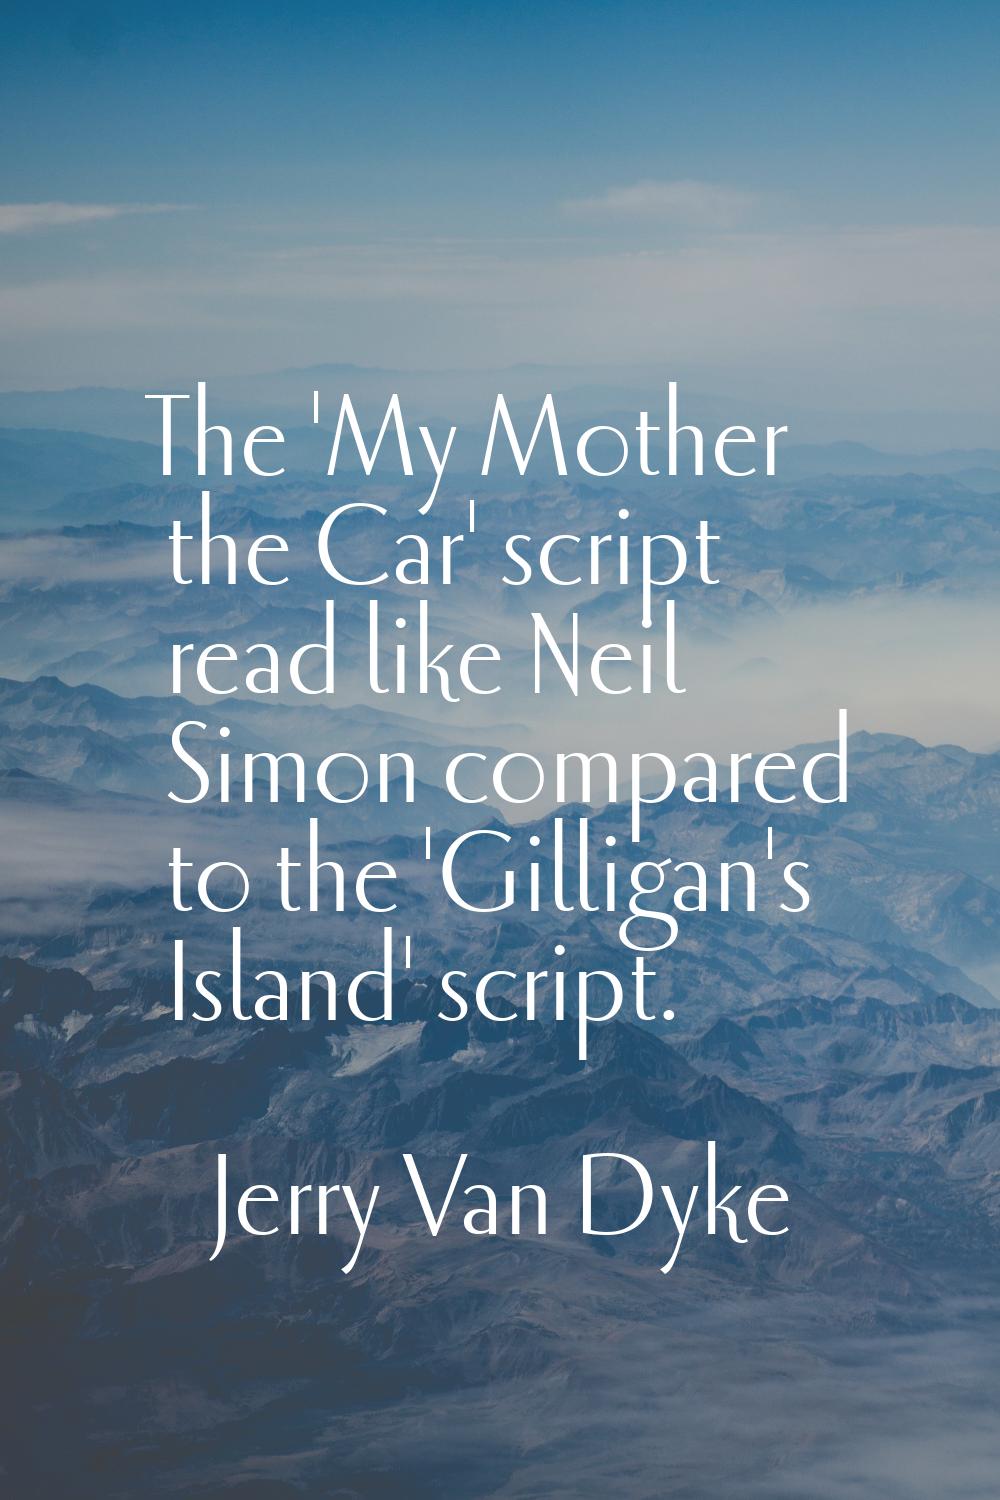 The 'My Mother the Car' script read like Neil Simon compared to the 'Gilligan's Island' script.